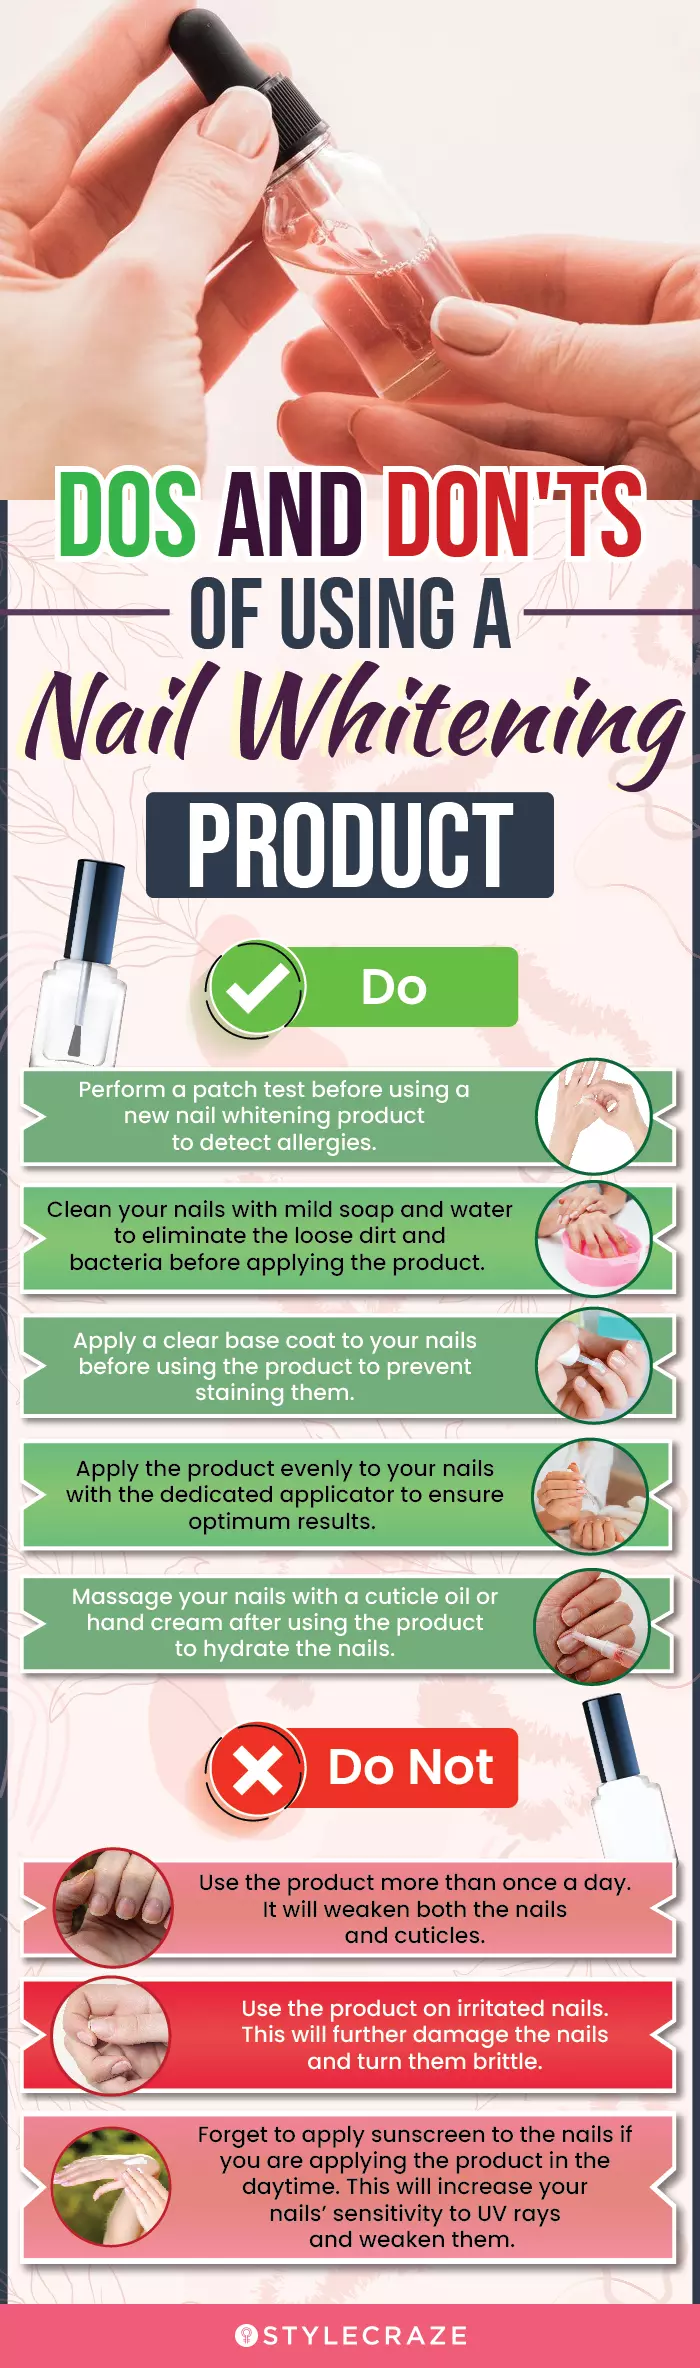 Dos And Don’ts Of Using A Nail Whitening Product (infographic)